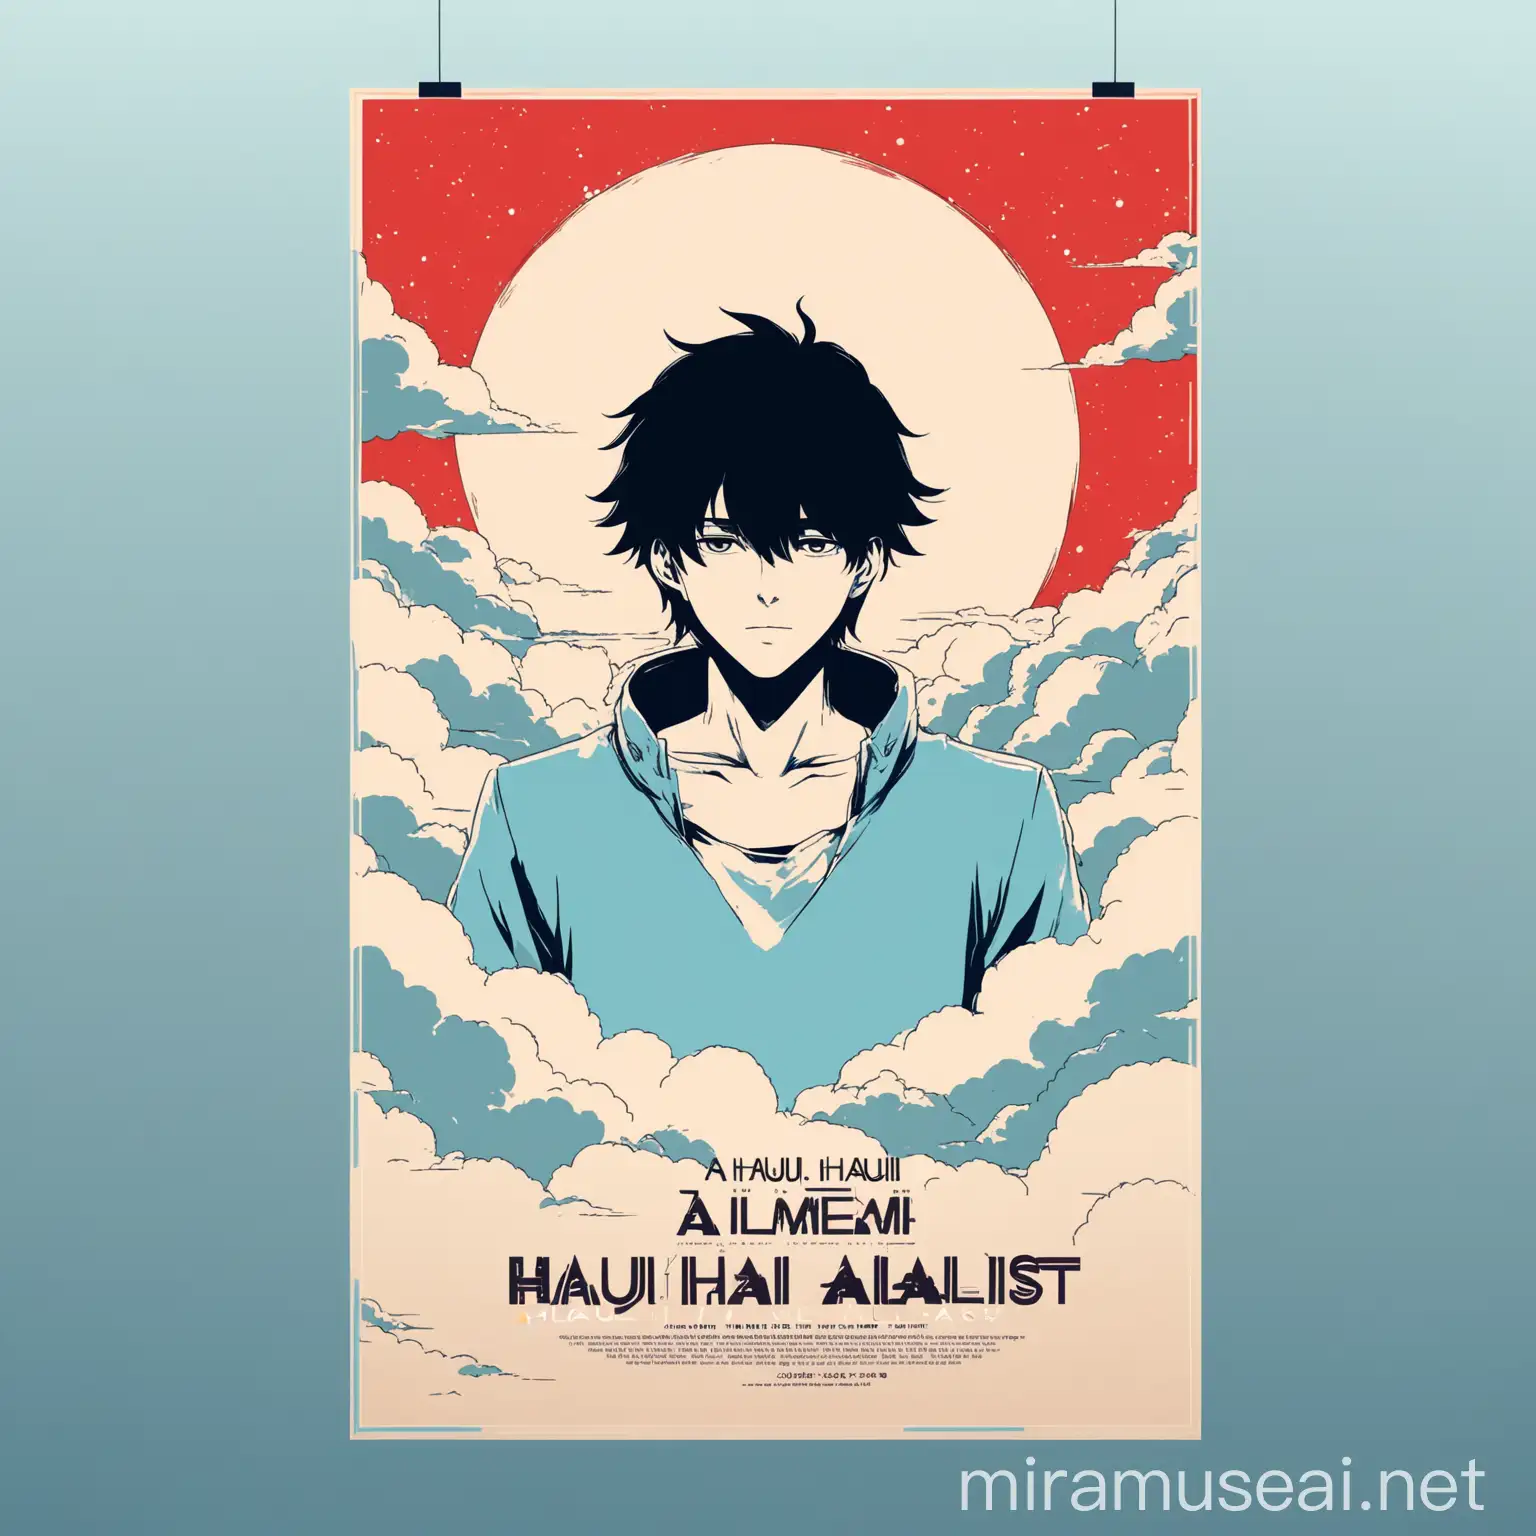 Create a super anime song poster design, A stylish men stand with in clouds space, face not showing, theme, Anime Poster, minimCreate a Anime Song Poster Design, A Men stand, face not showing, theme, Anime Poster, minimalist color, Flate color, Simple Poster hd, clarity, Title- Hauli Hauli
alist color, hd, clarity.